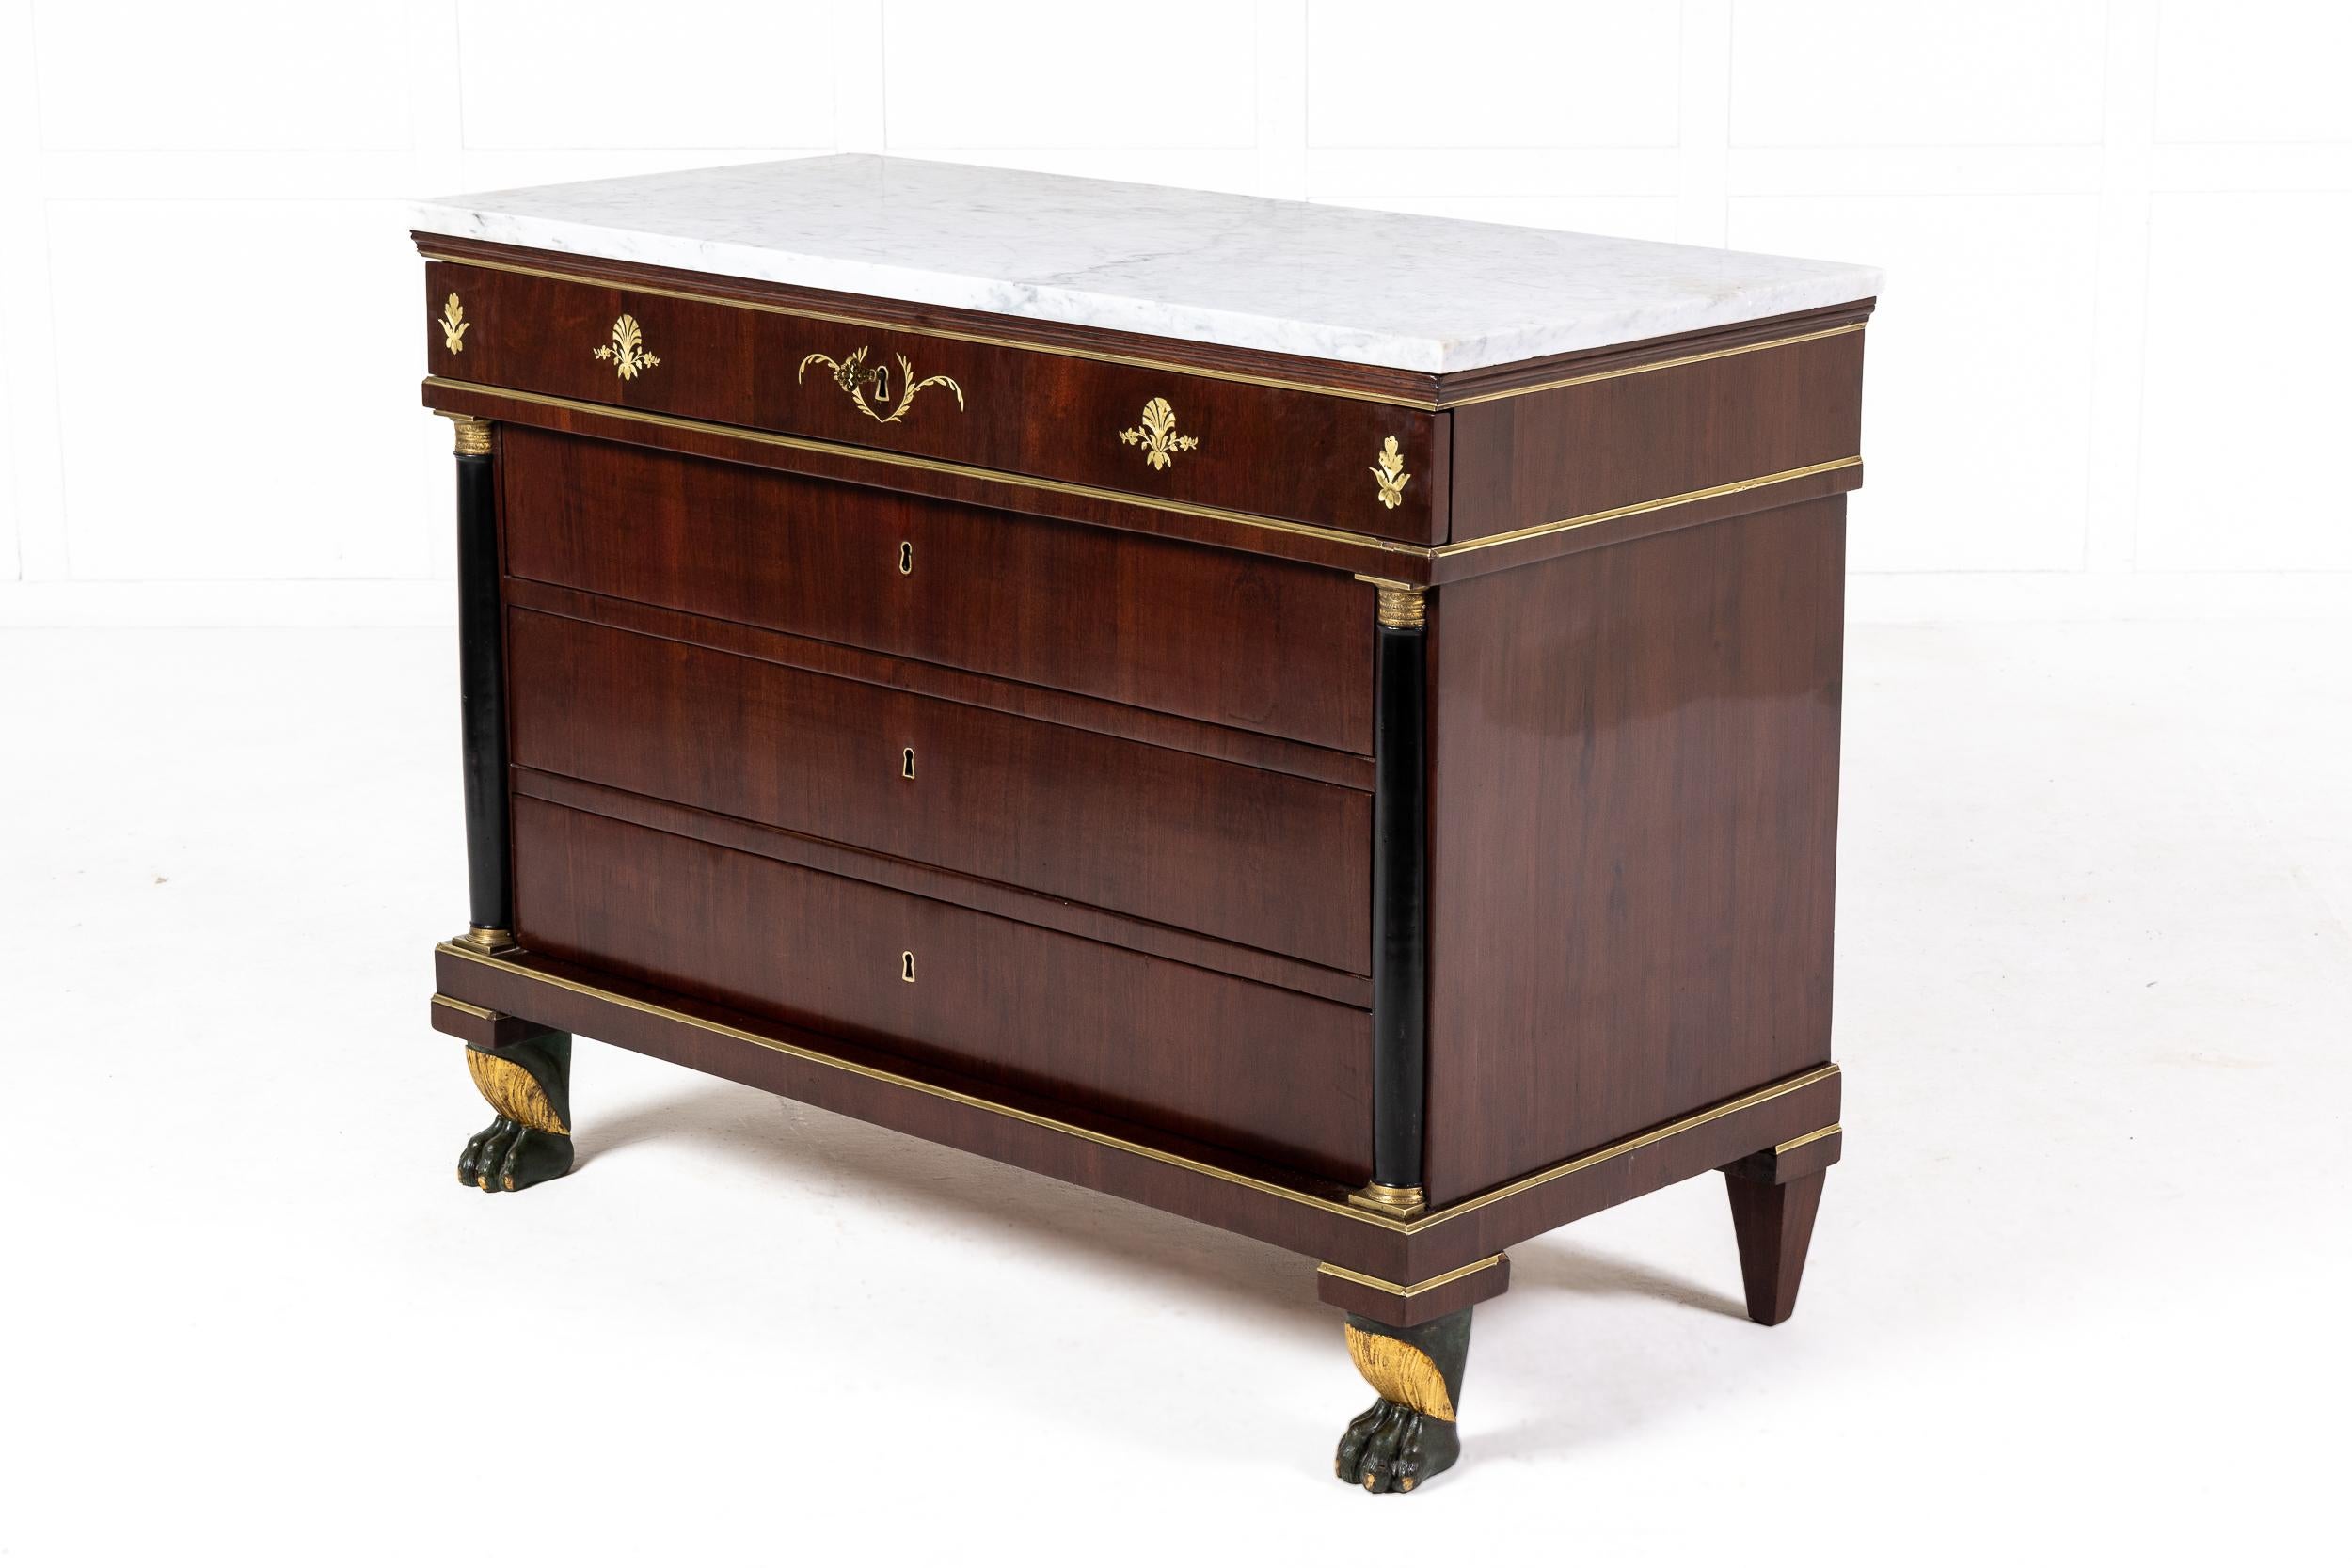 Pair of Italian Rosewood Inlaid 'Empire' Commodes C1820 For Sale 4